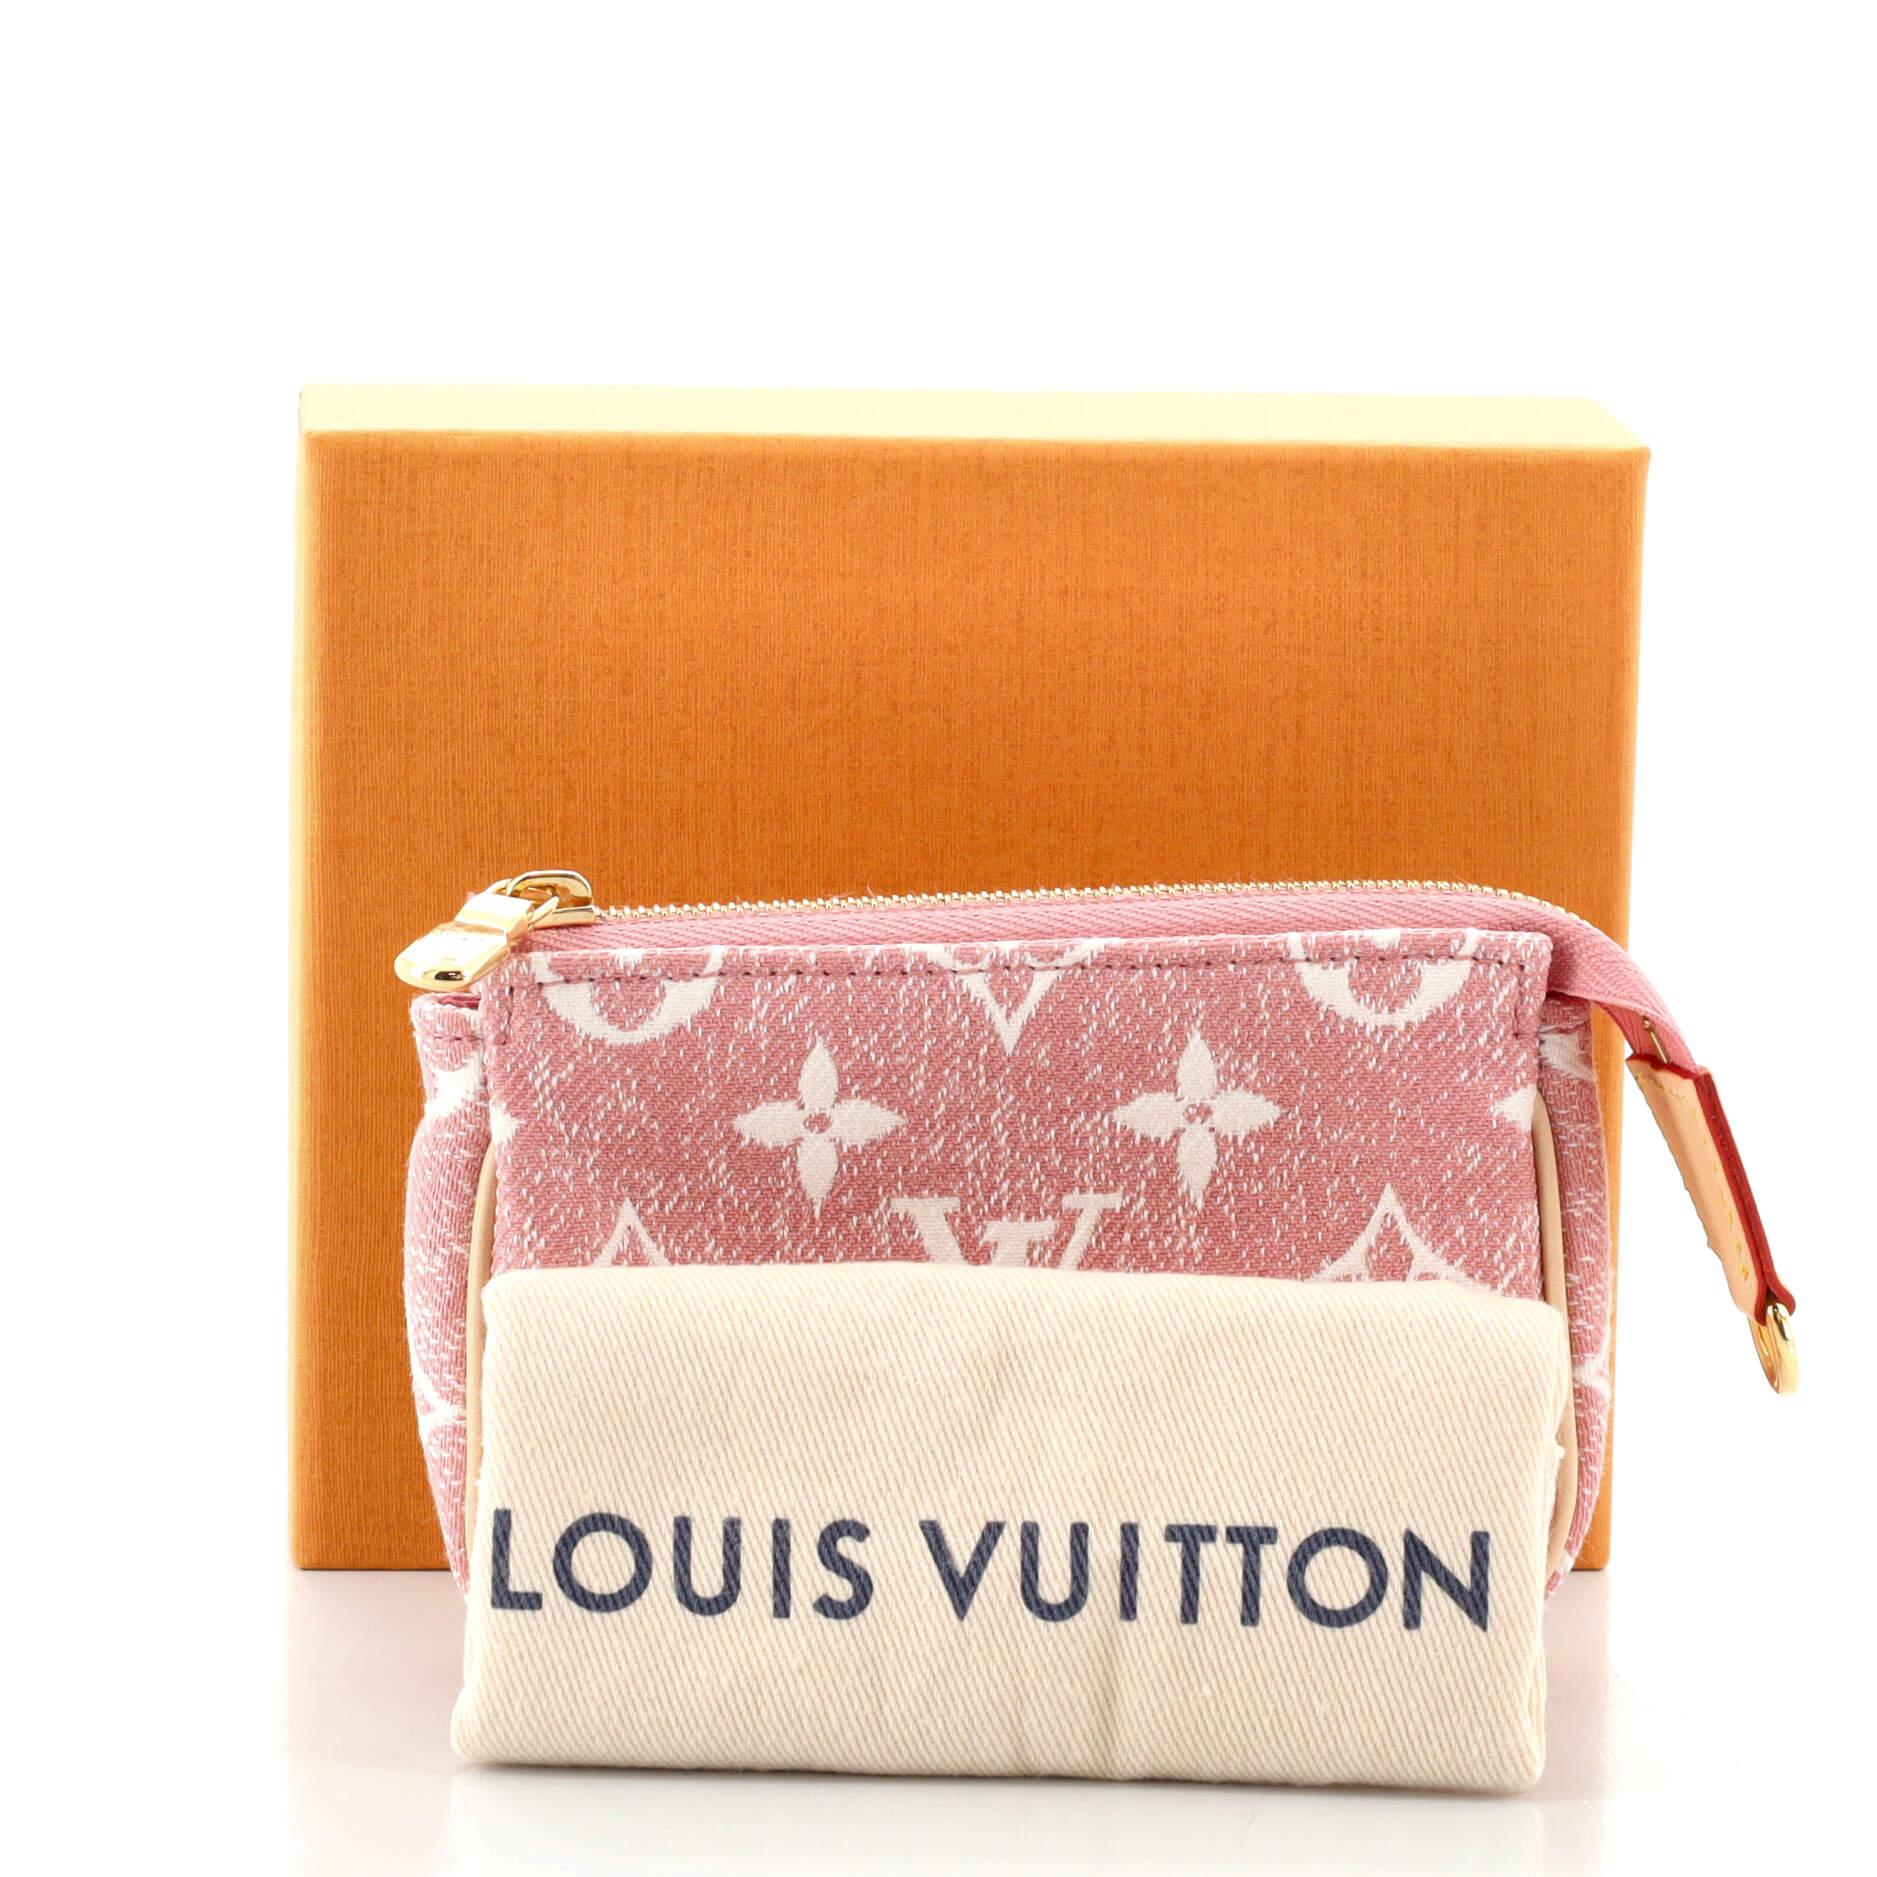 IT'S AS SMALL AS A WALLET  New LV Micro Pochette Accessories